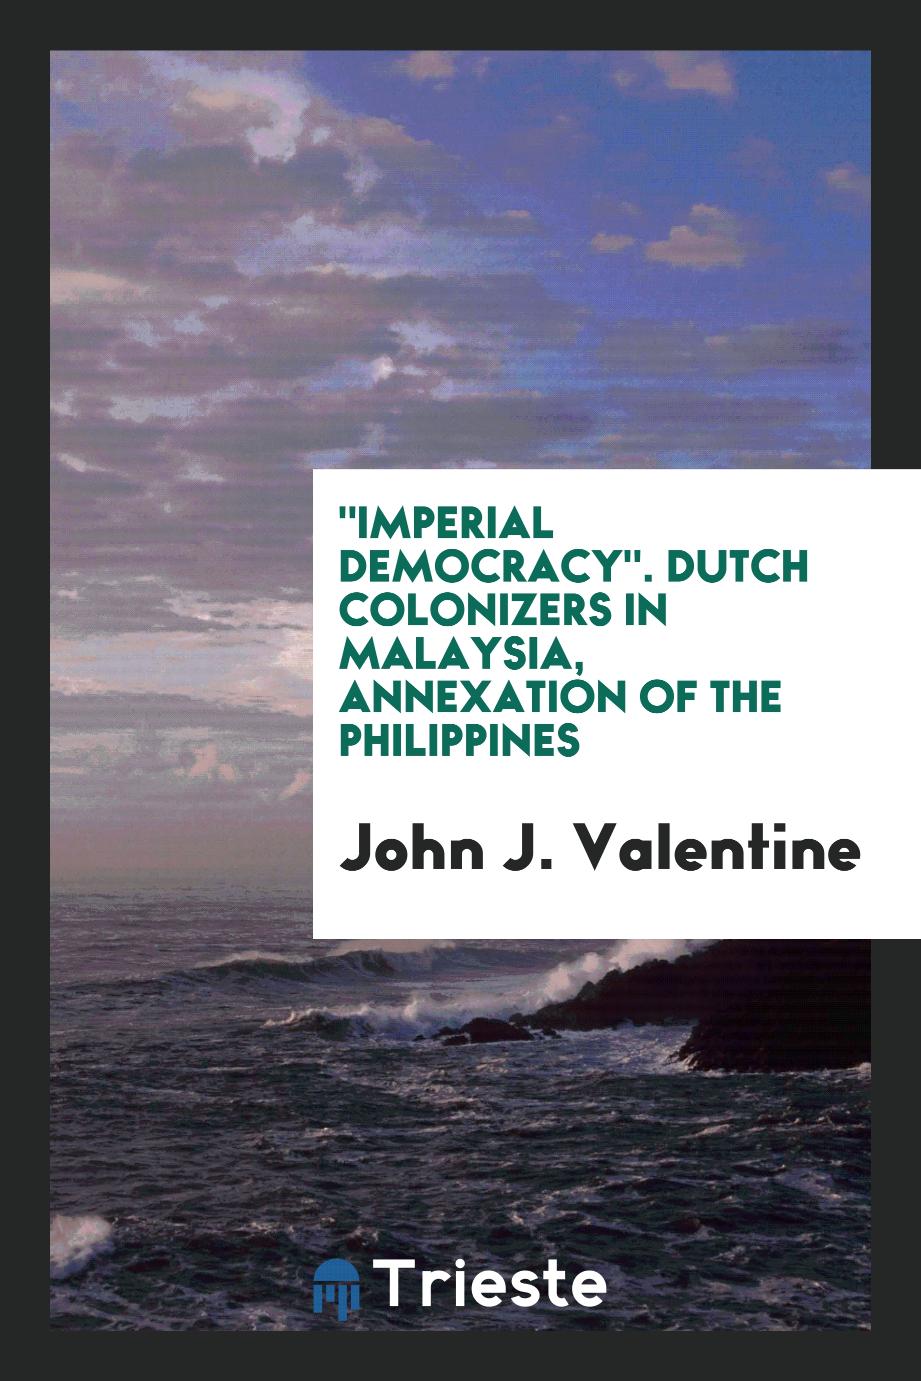 "Imperial democracy". Dutch colonizers in Malaysia, annexation of the Philippines